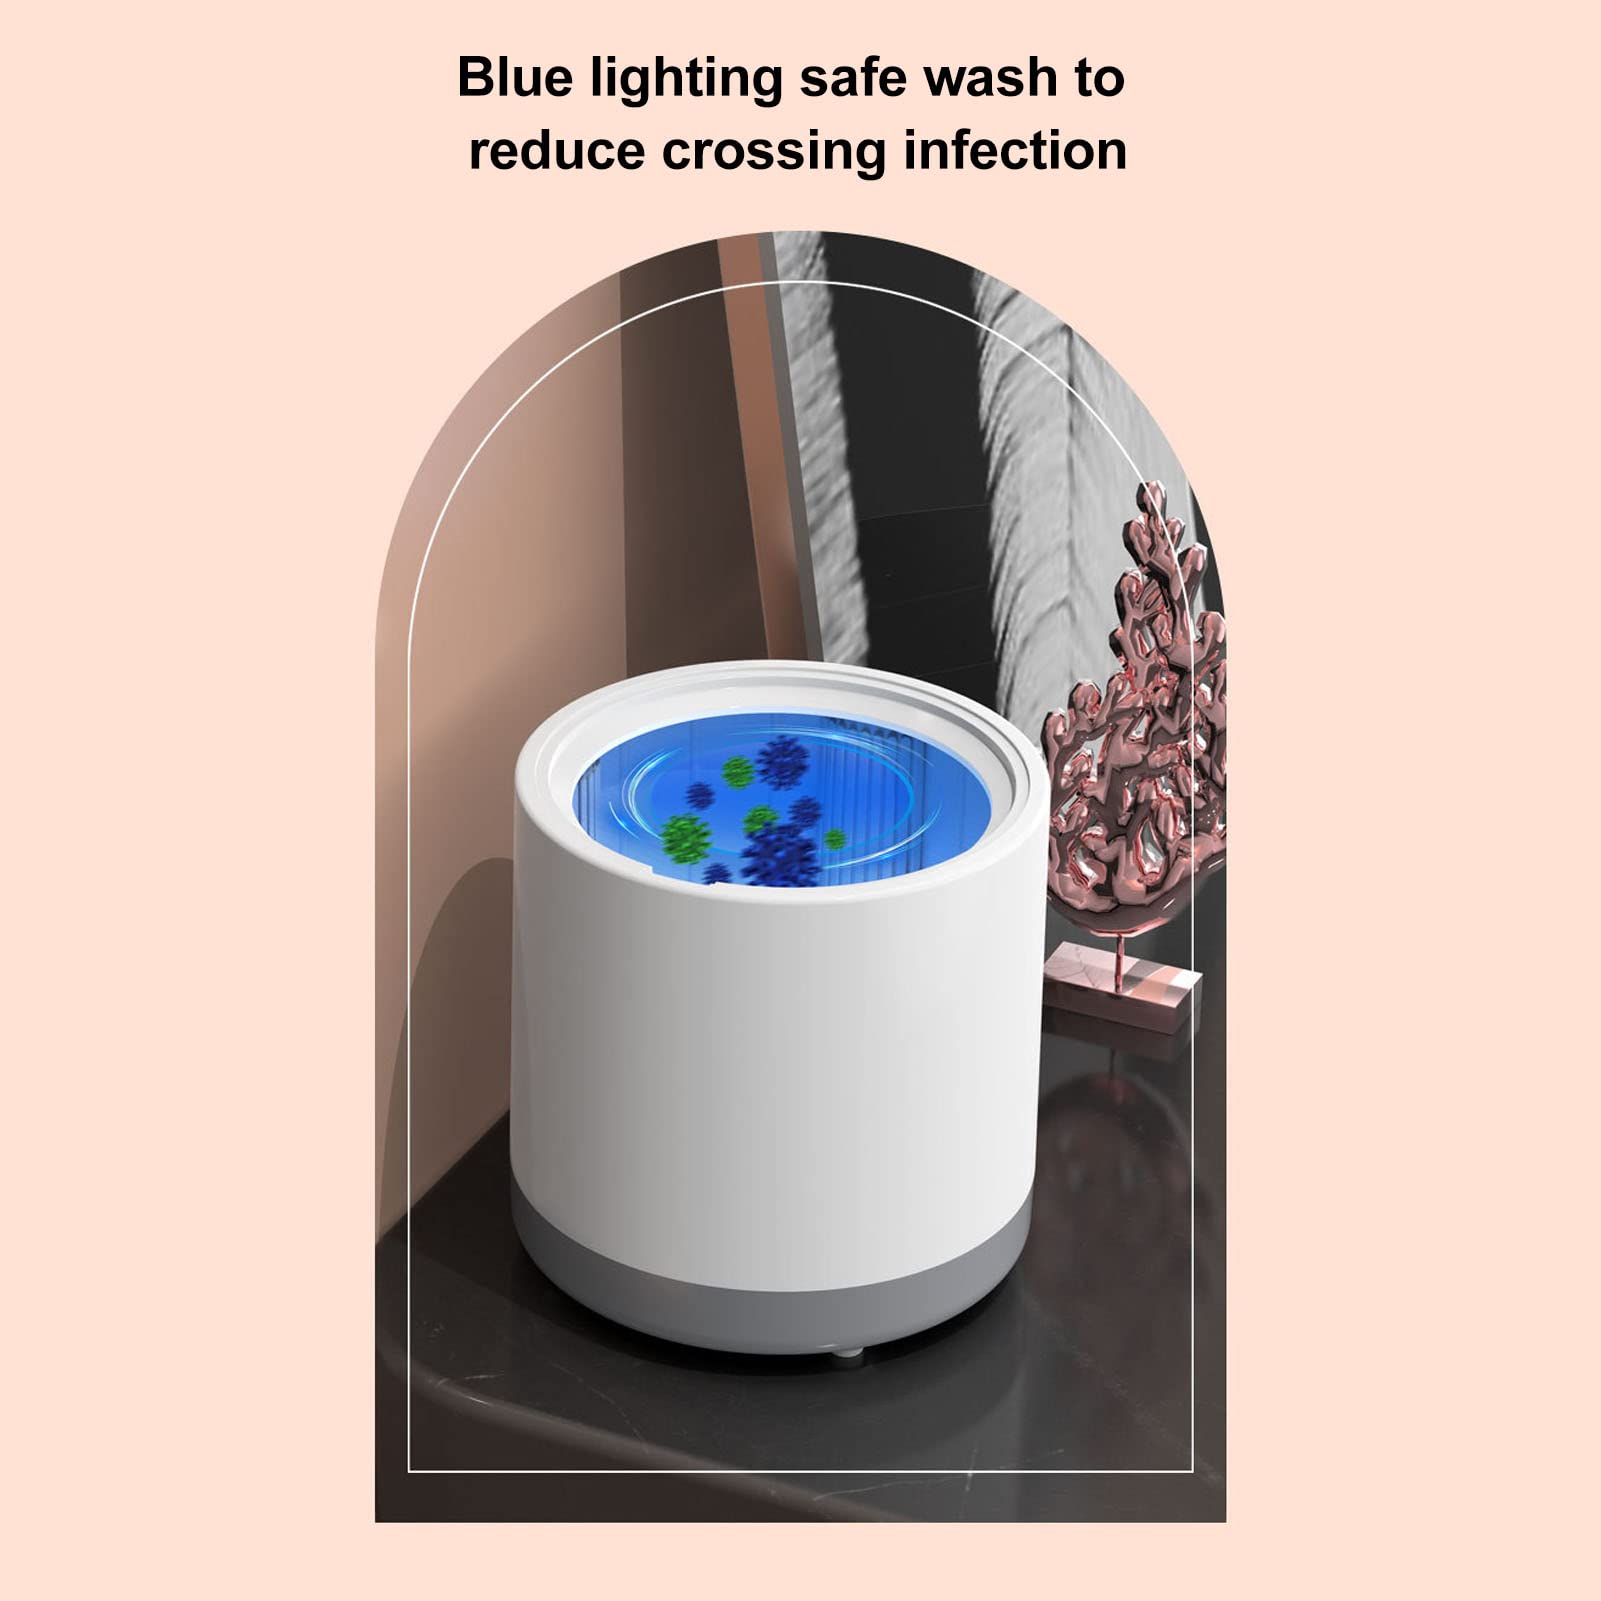 Portable Washing Machine, 2 in 1 6L Mini Washer and Spin Dryer with Drain Basket and Blue Lighting, Compact Laundry Machine Automatic Washing Machine for Underwear for Apartment RV (US Plug)